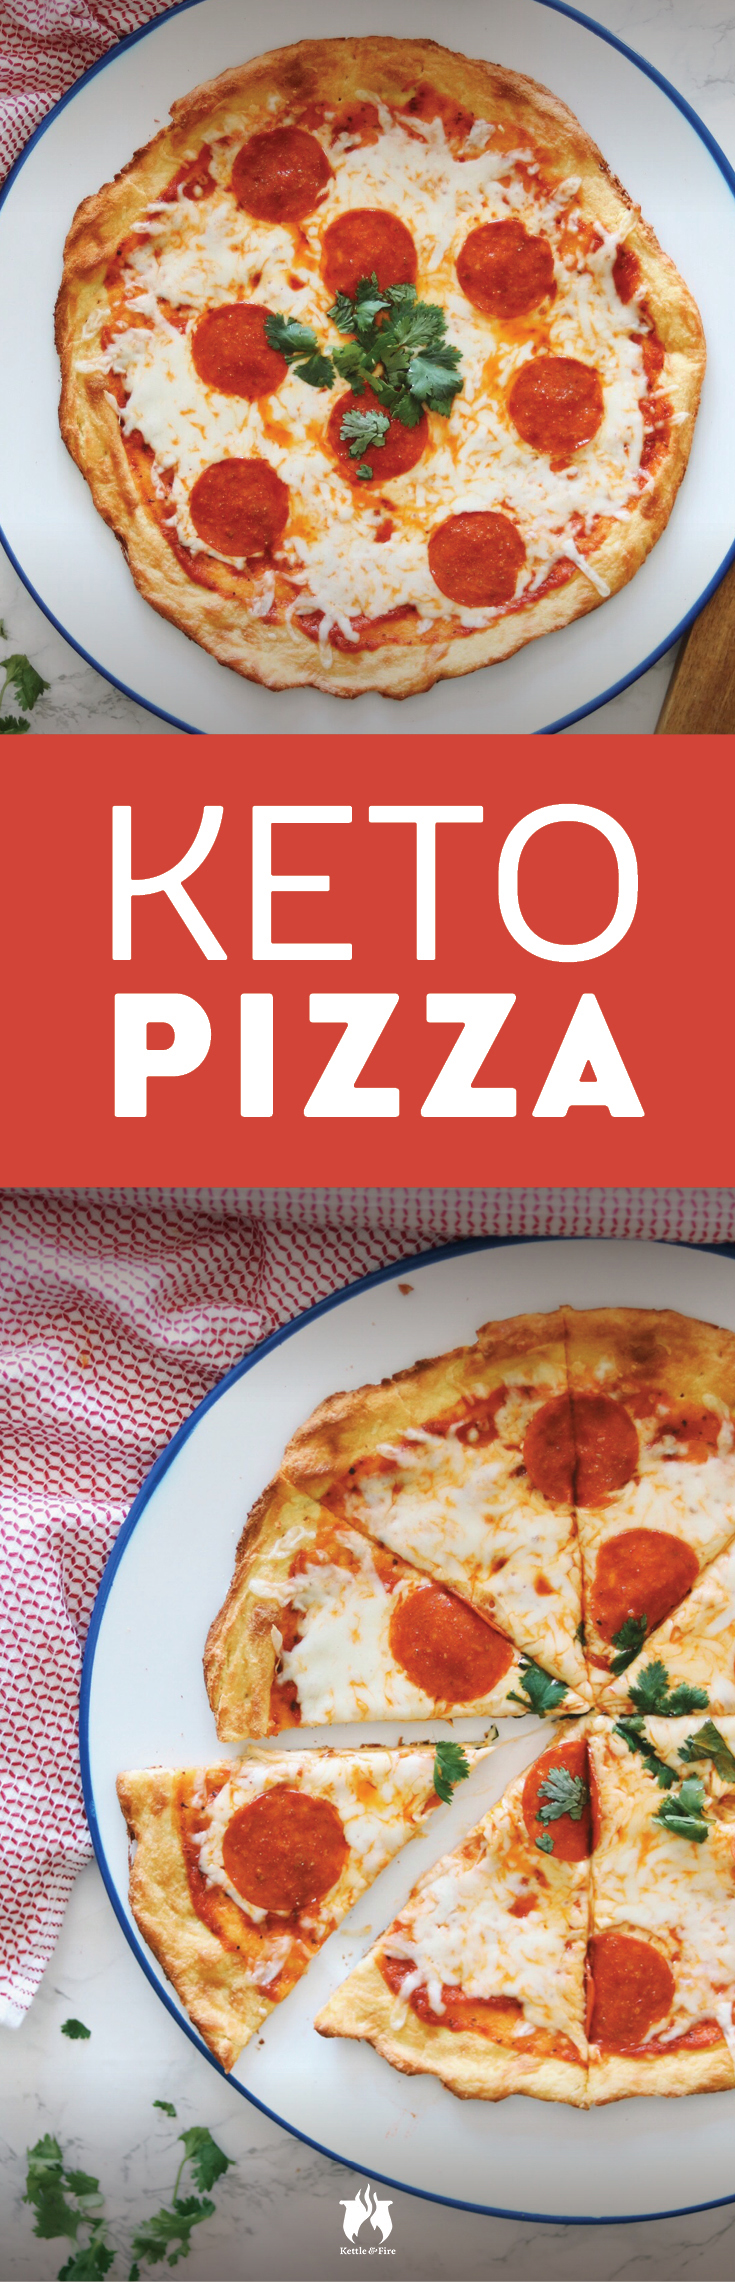 Sometimes we can’t believe the keto diet is called a diet, especially when you get your hands on recipes like this Keto Pizza with Pepperoni.